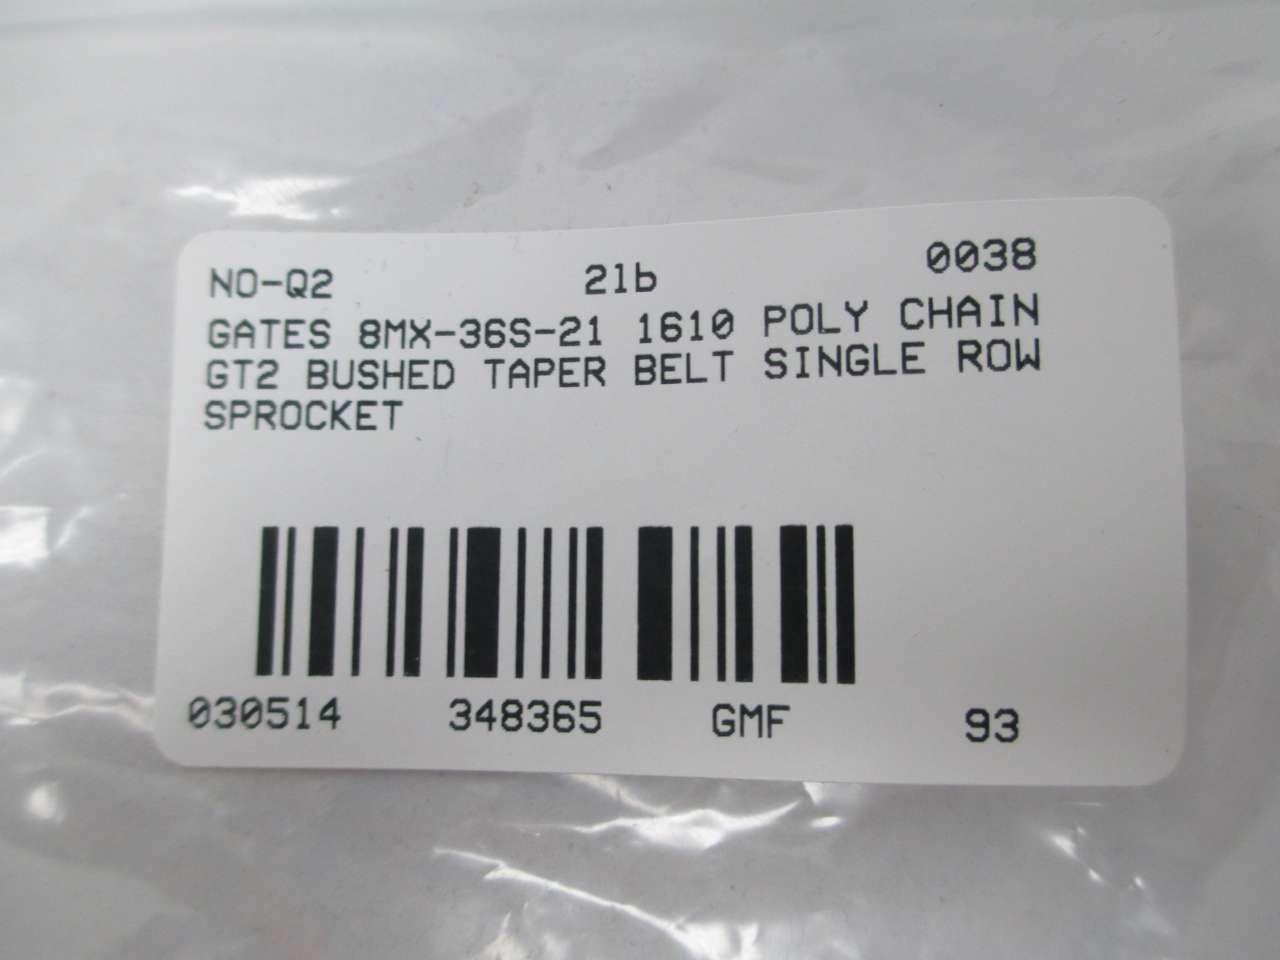 Gates Poly Chain GT2 Sprocket 8MX-36S-21 1610 NEW IN BOX 72053270976 